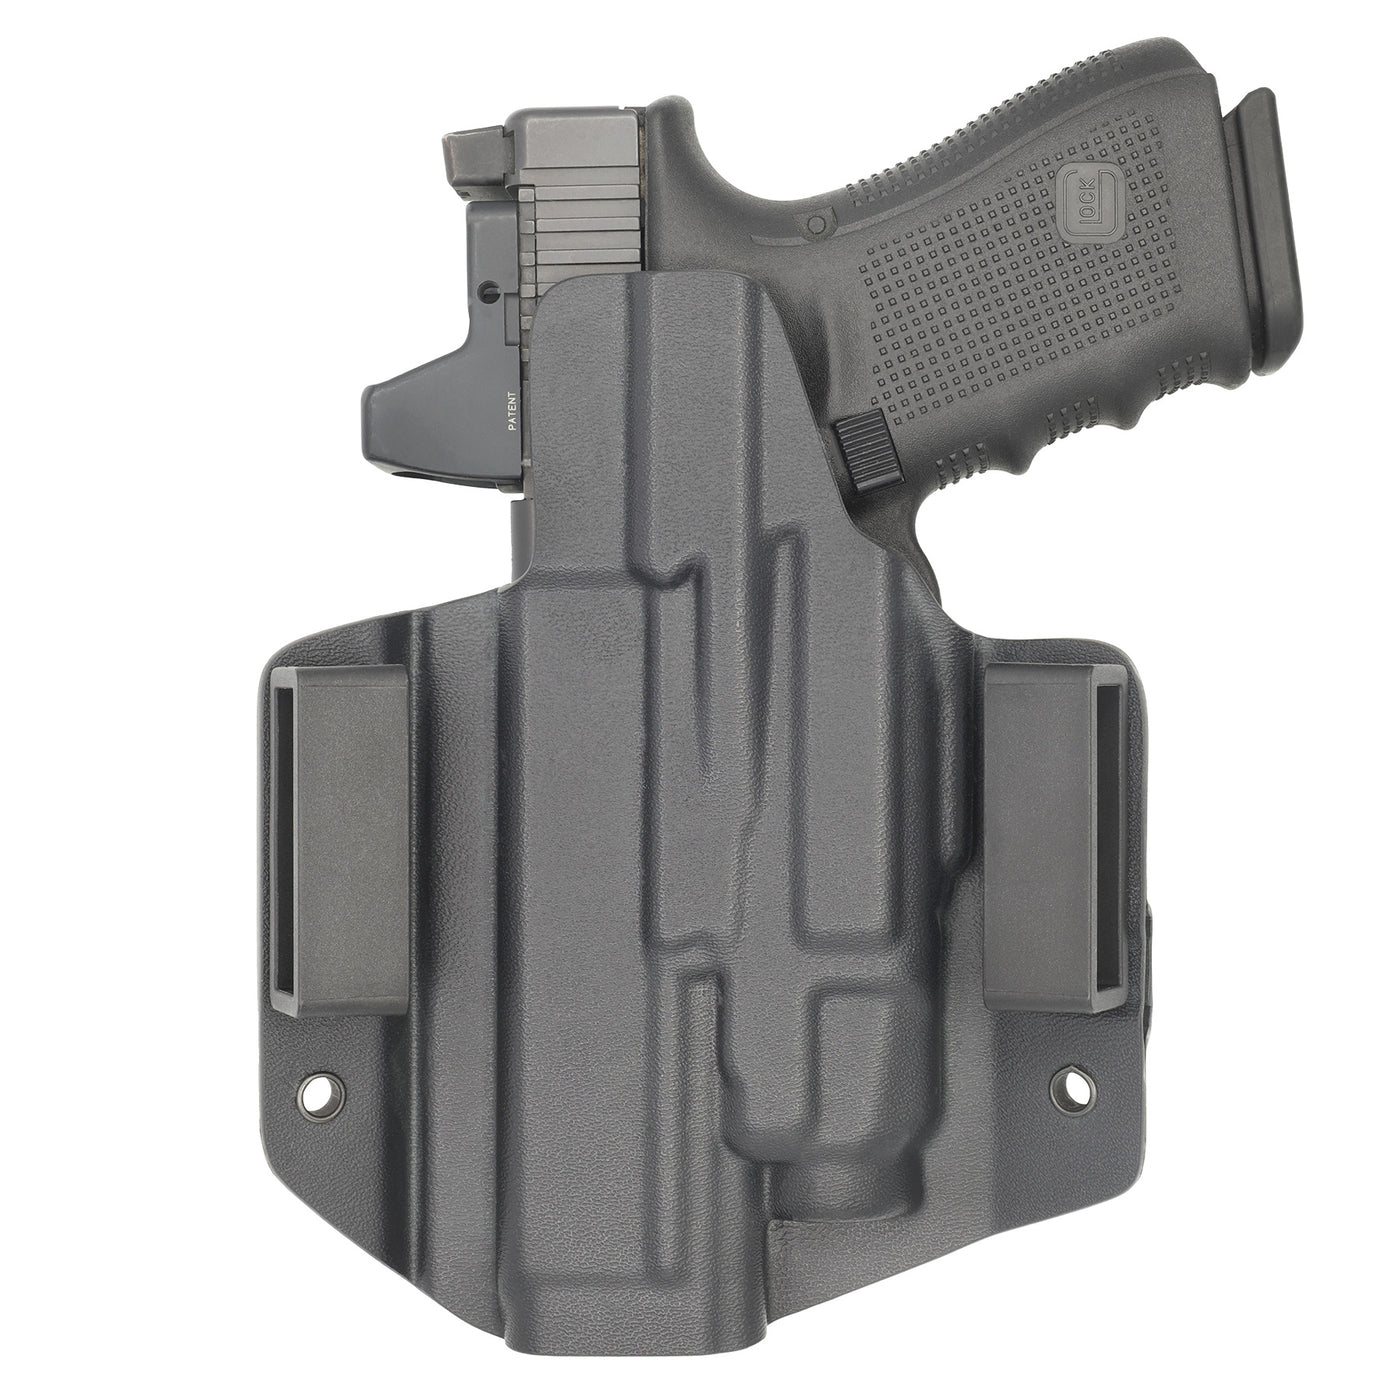 C&G Holsters Quickship OWB Tactical Glock 19/23 Streamlight TLR7 in holstered position back view